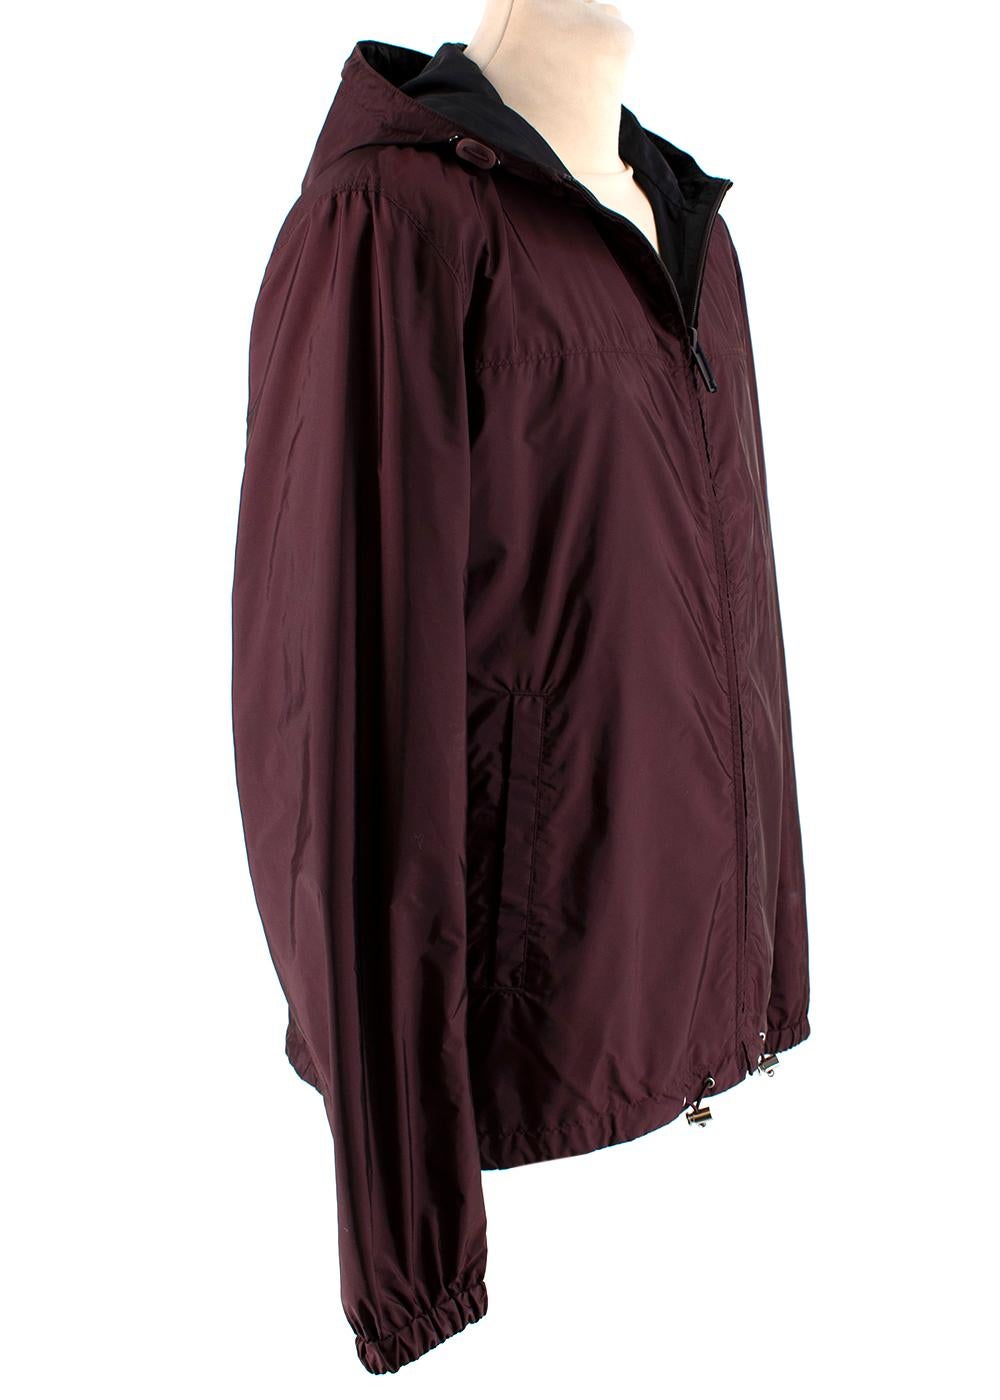 Prada Black & Burgundy Reversible Hooded Nylon Jacket  - US size 42 In New Condition For Sale In London, GB